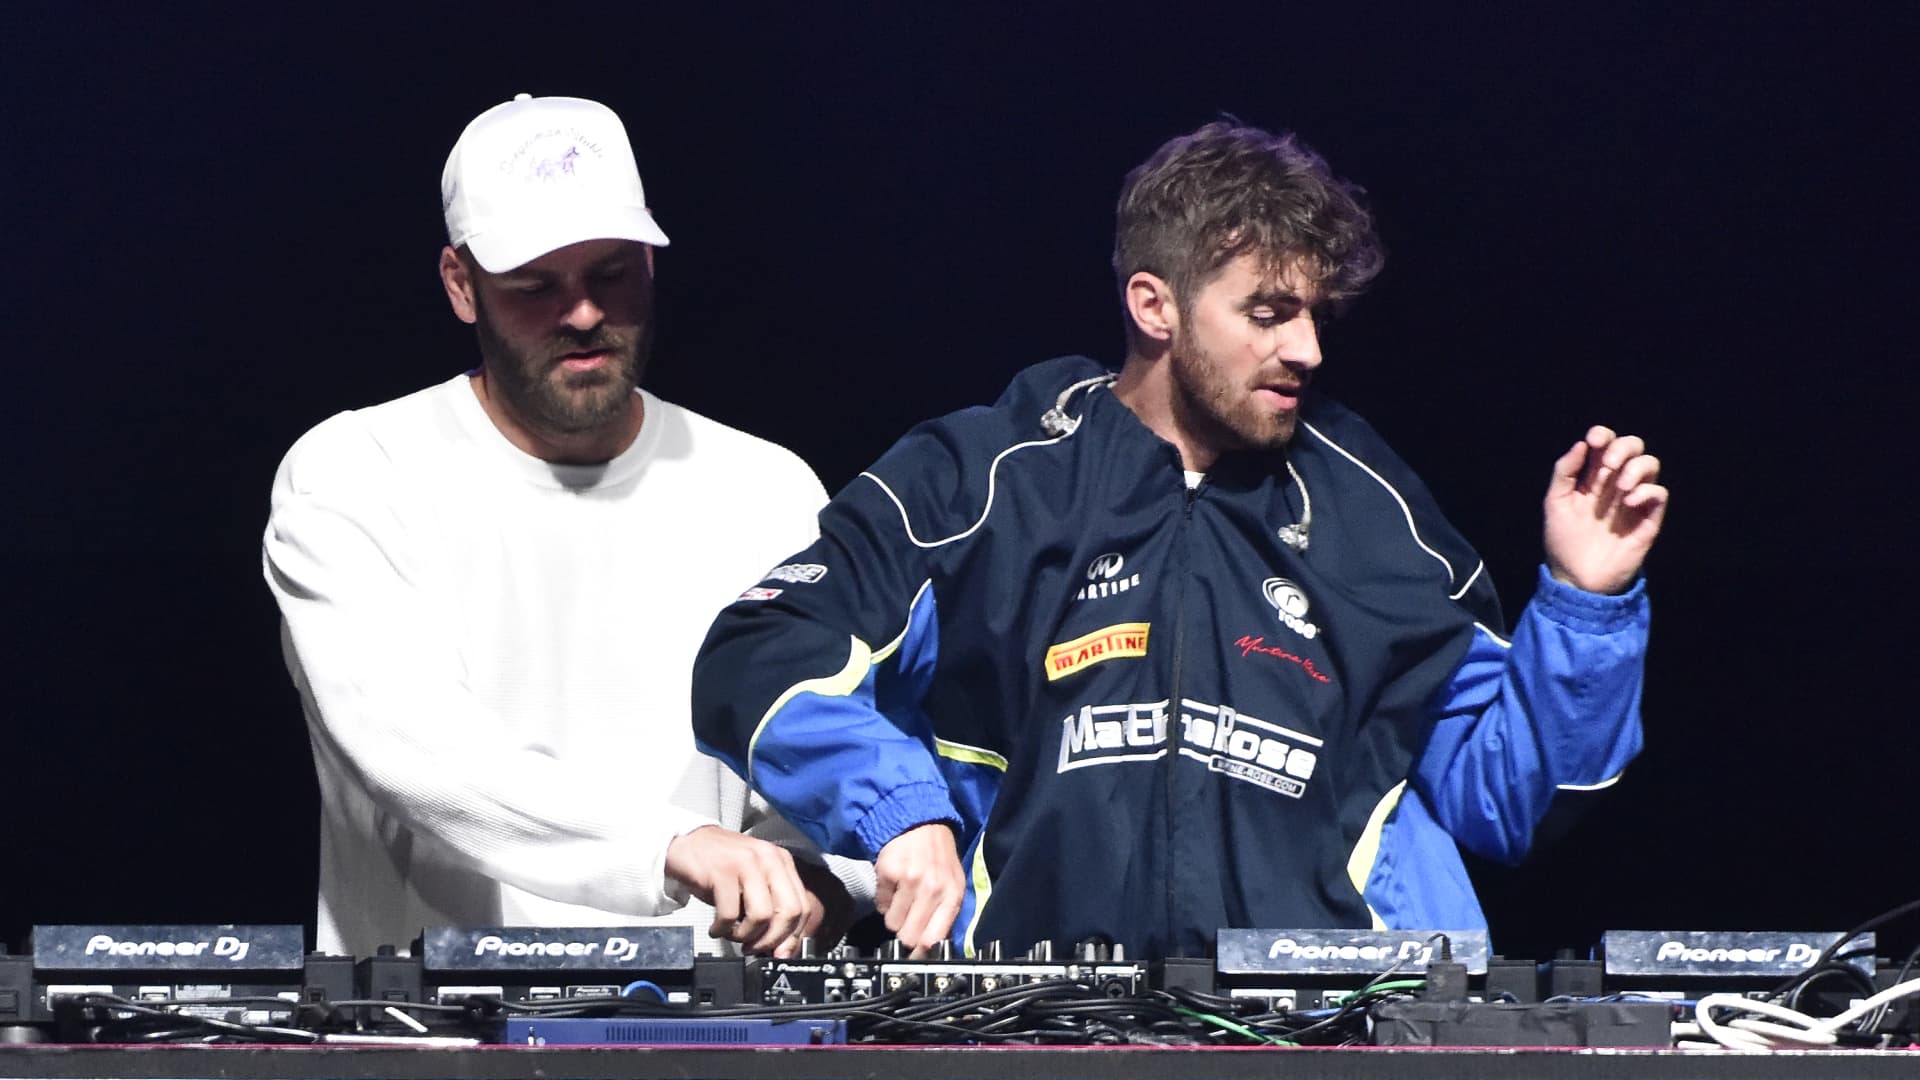 DJ duo The Chainsmokers want to use AI to clone their own voices